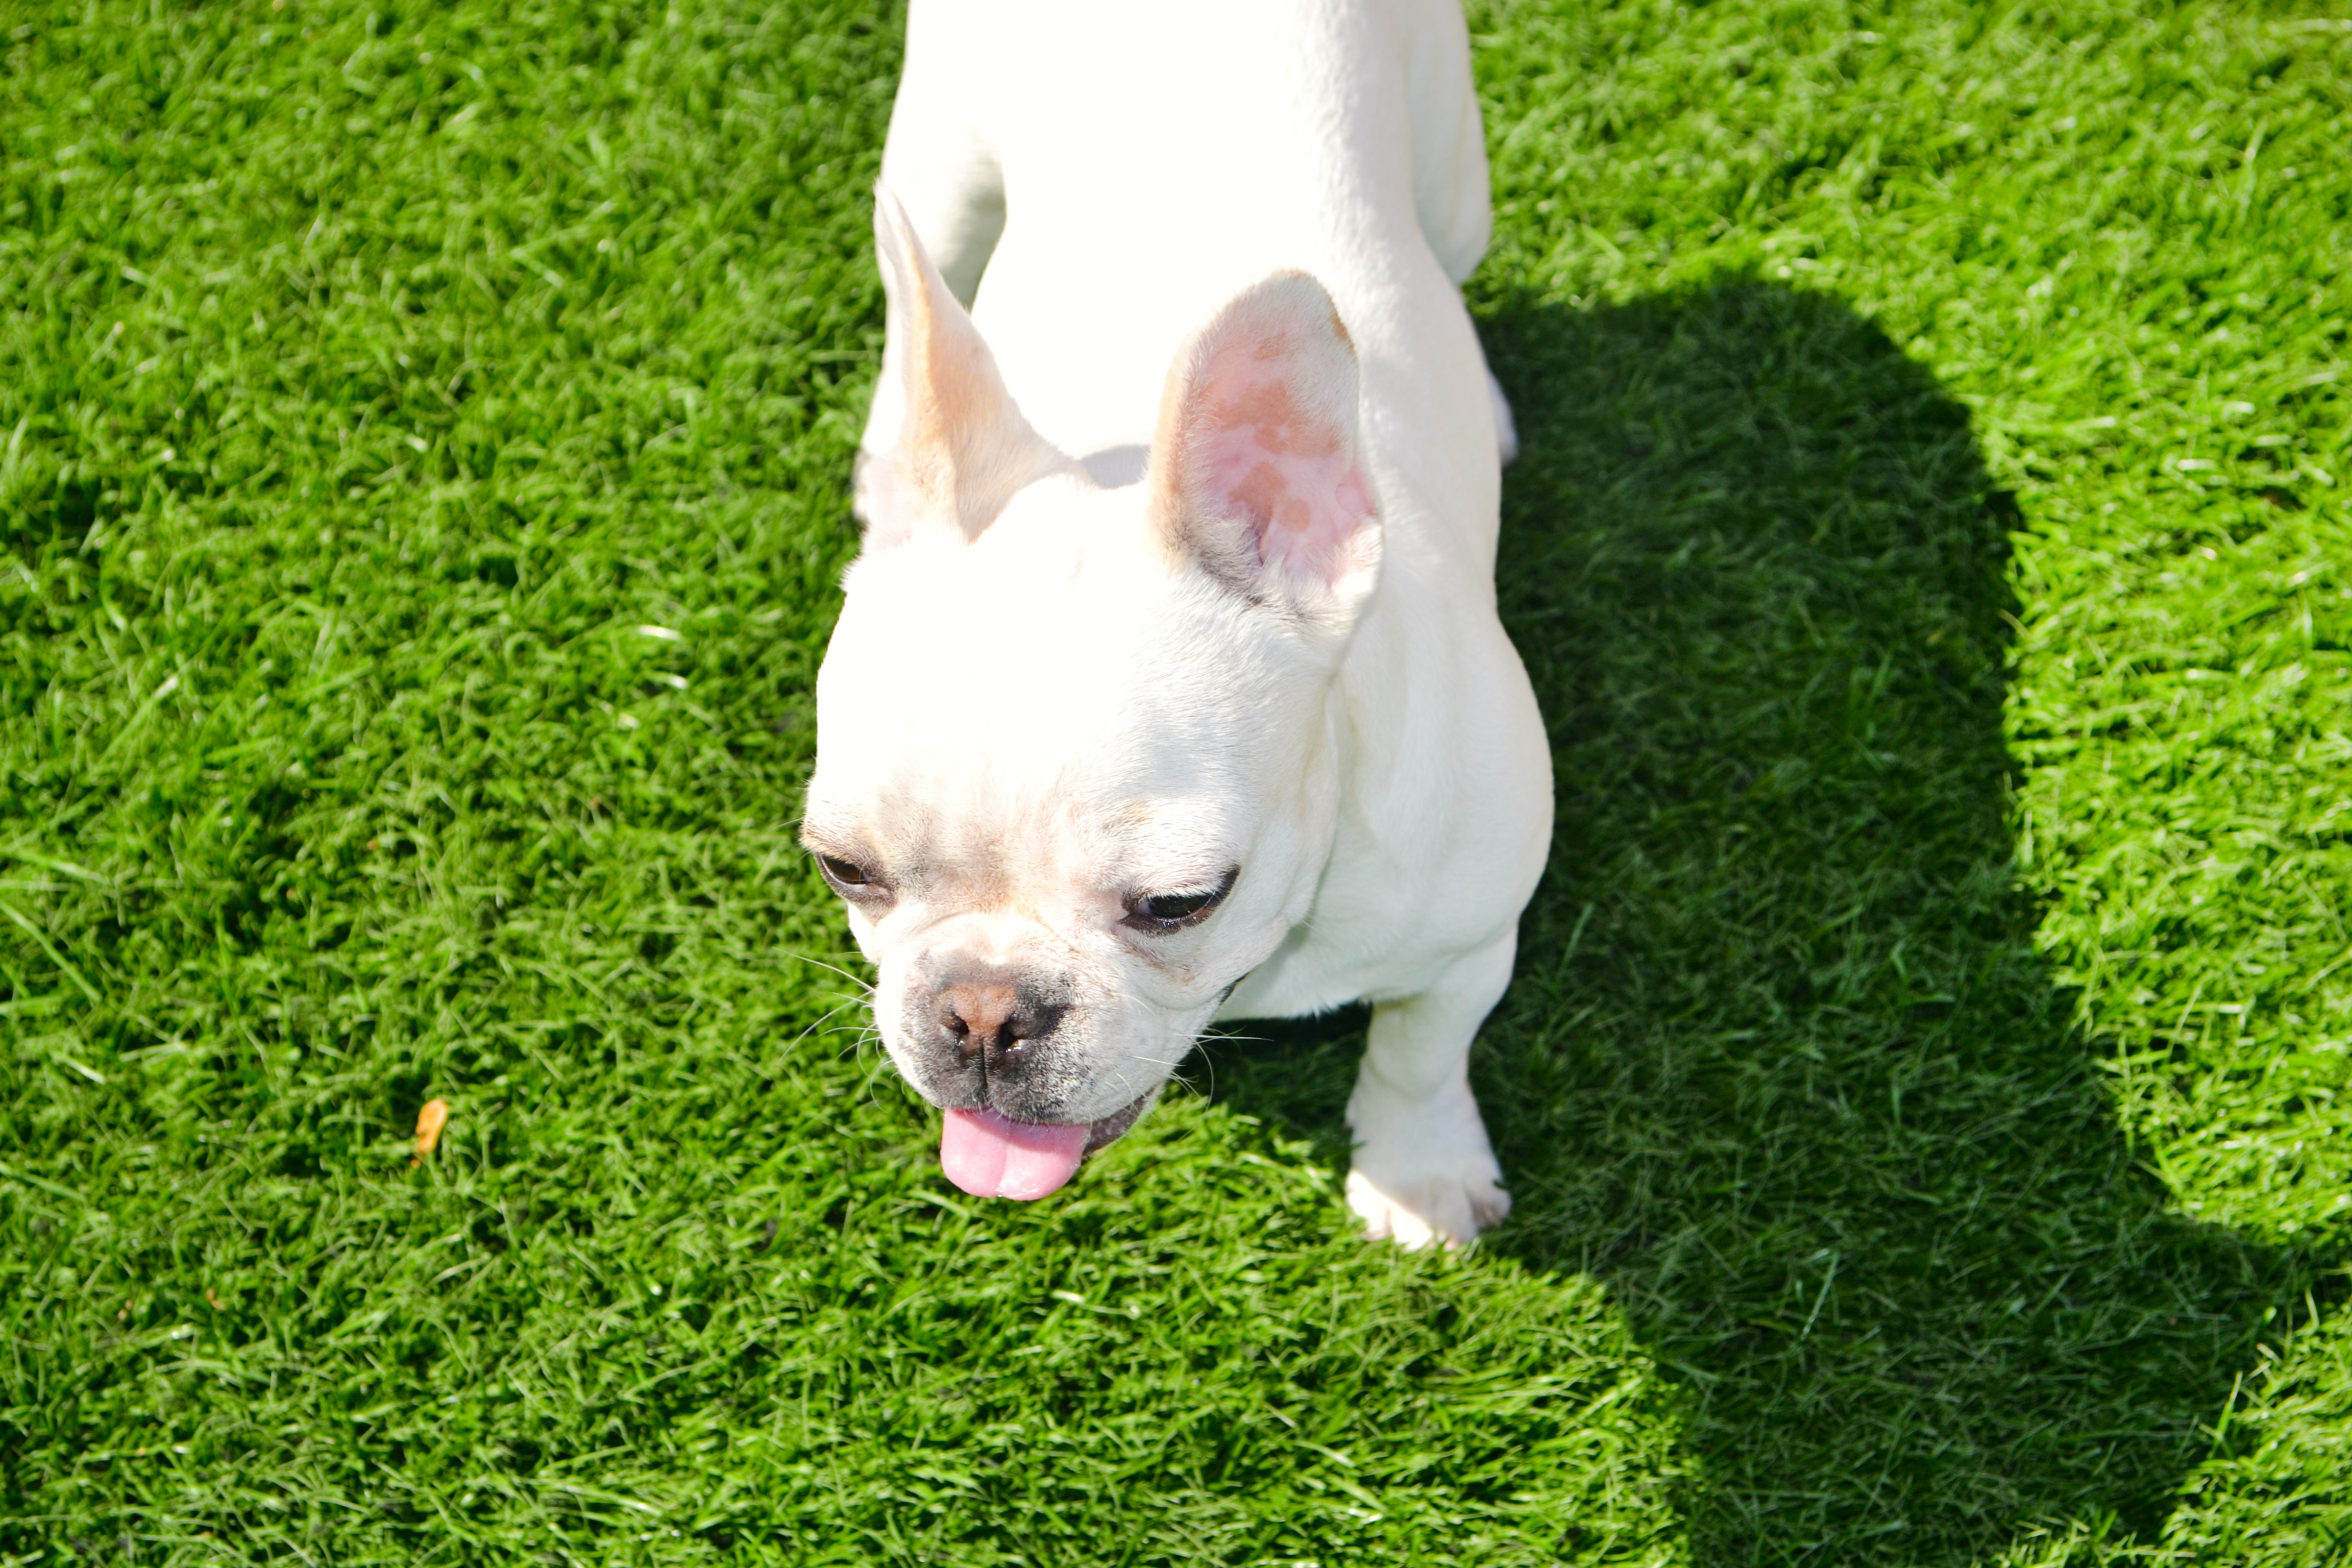 A white dog on an artificial lawn